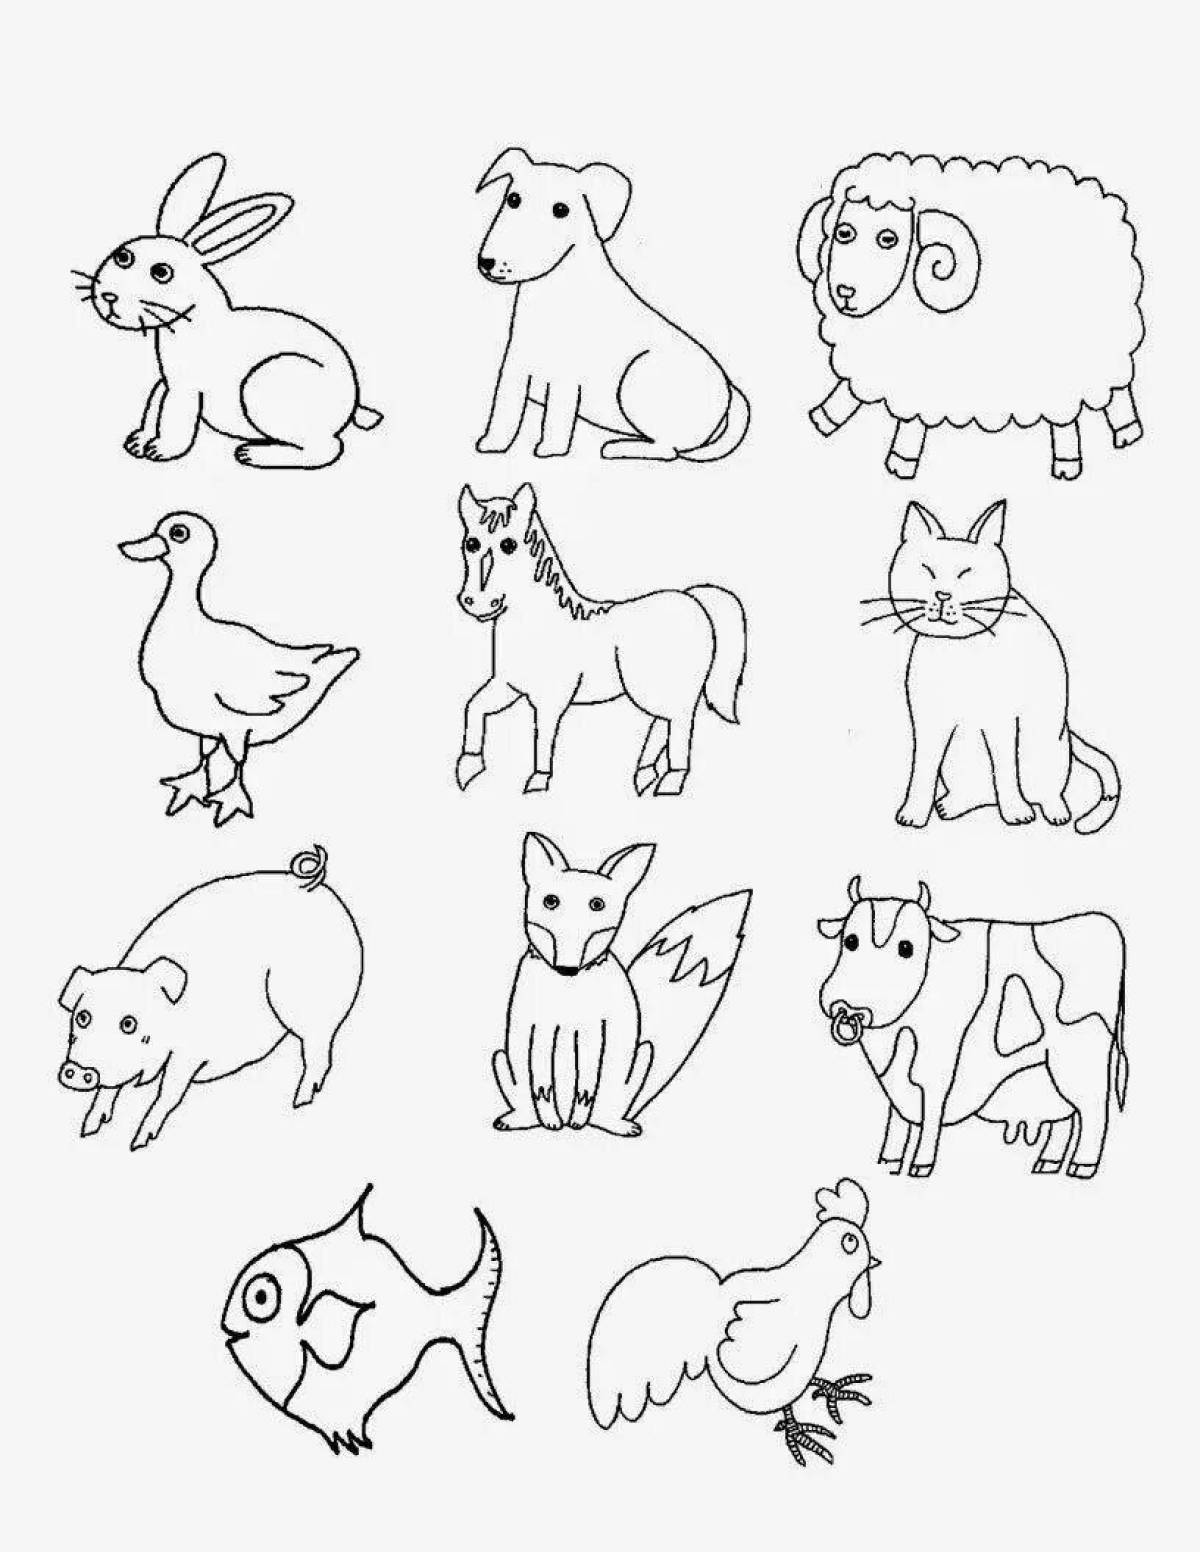 Witty pet coloring pages for 5-6 year olds